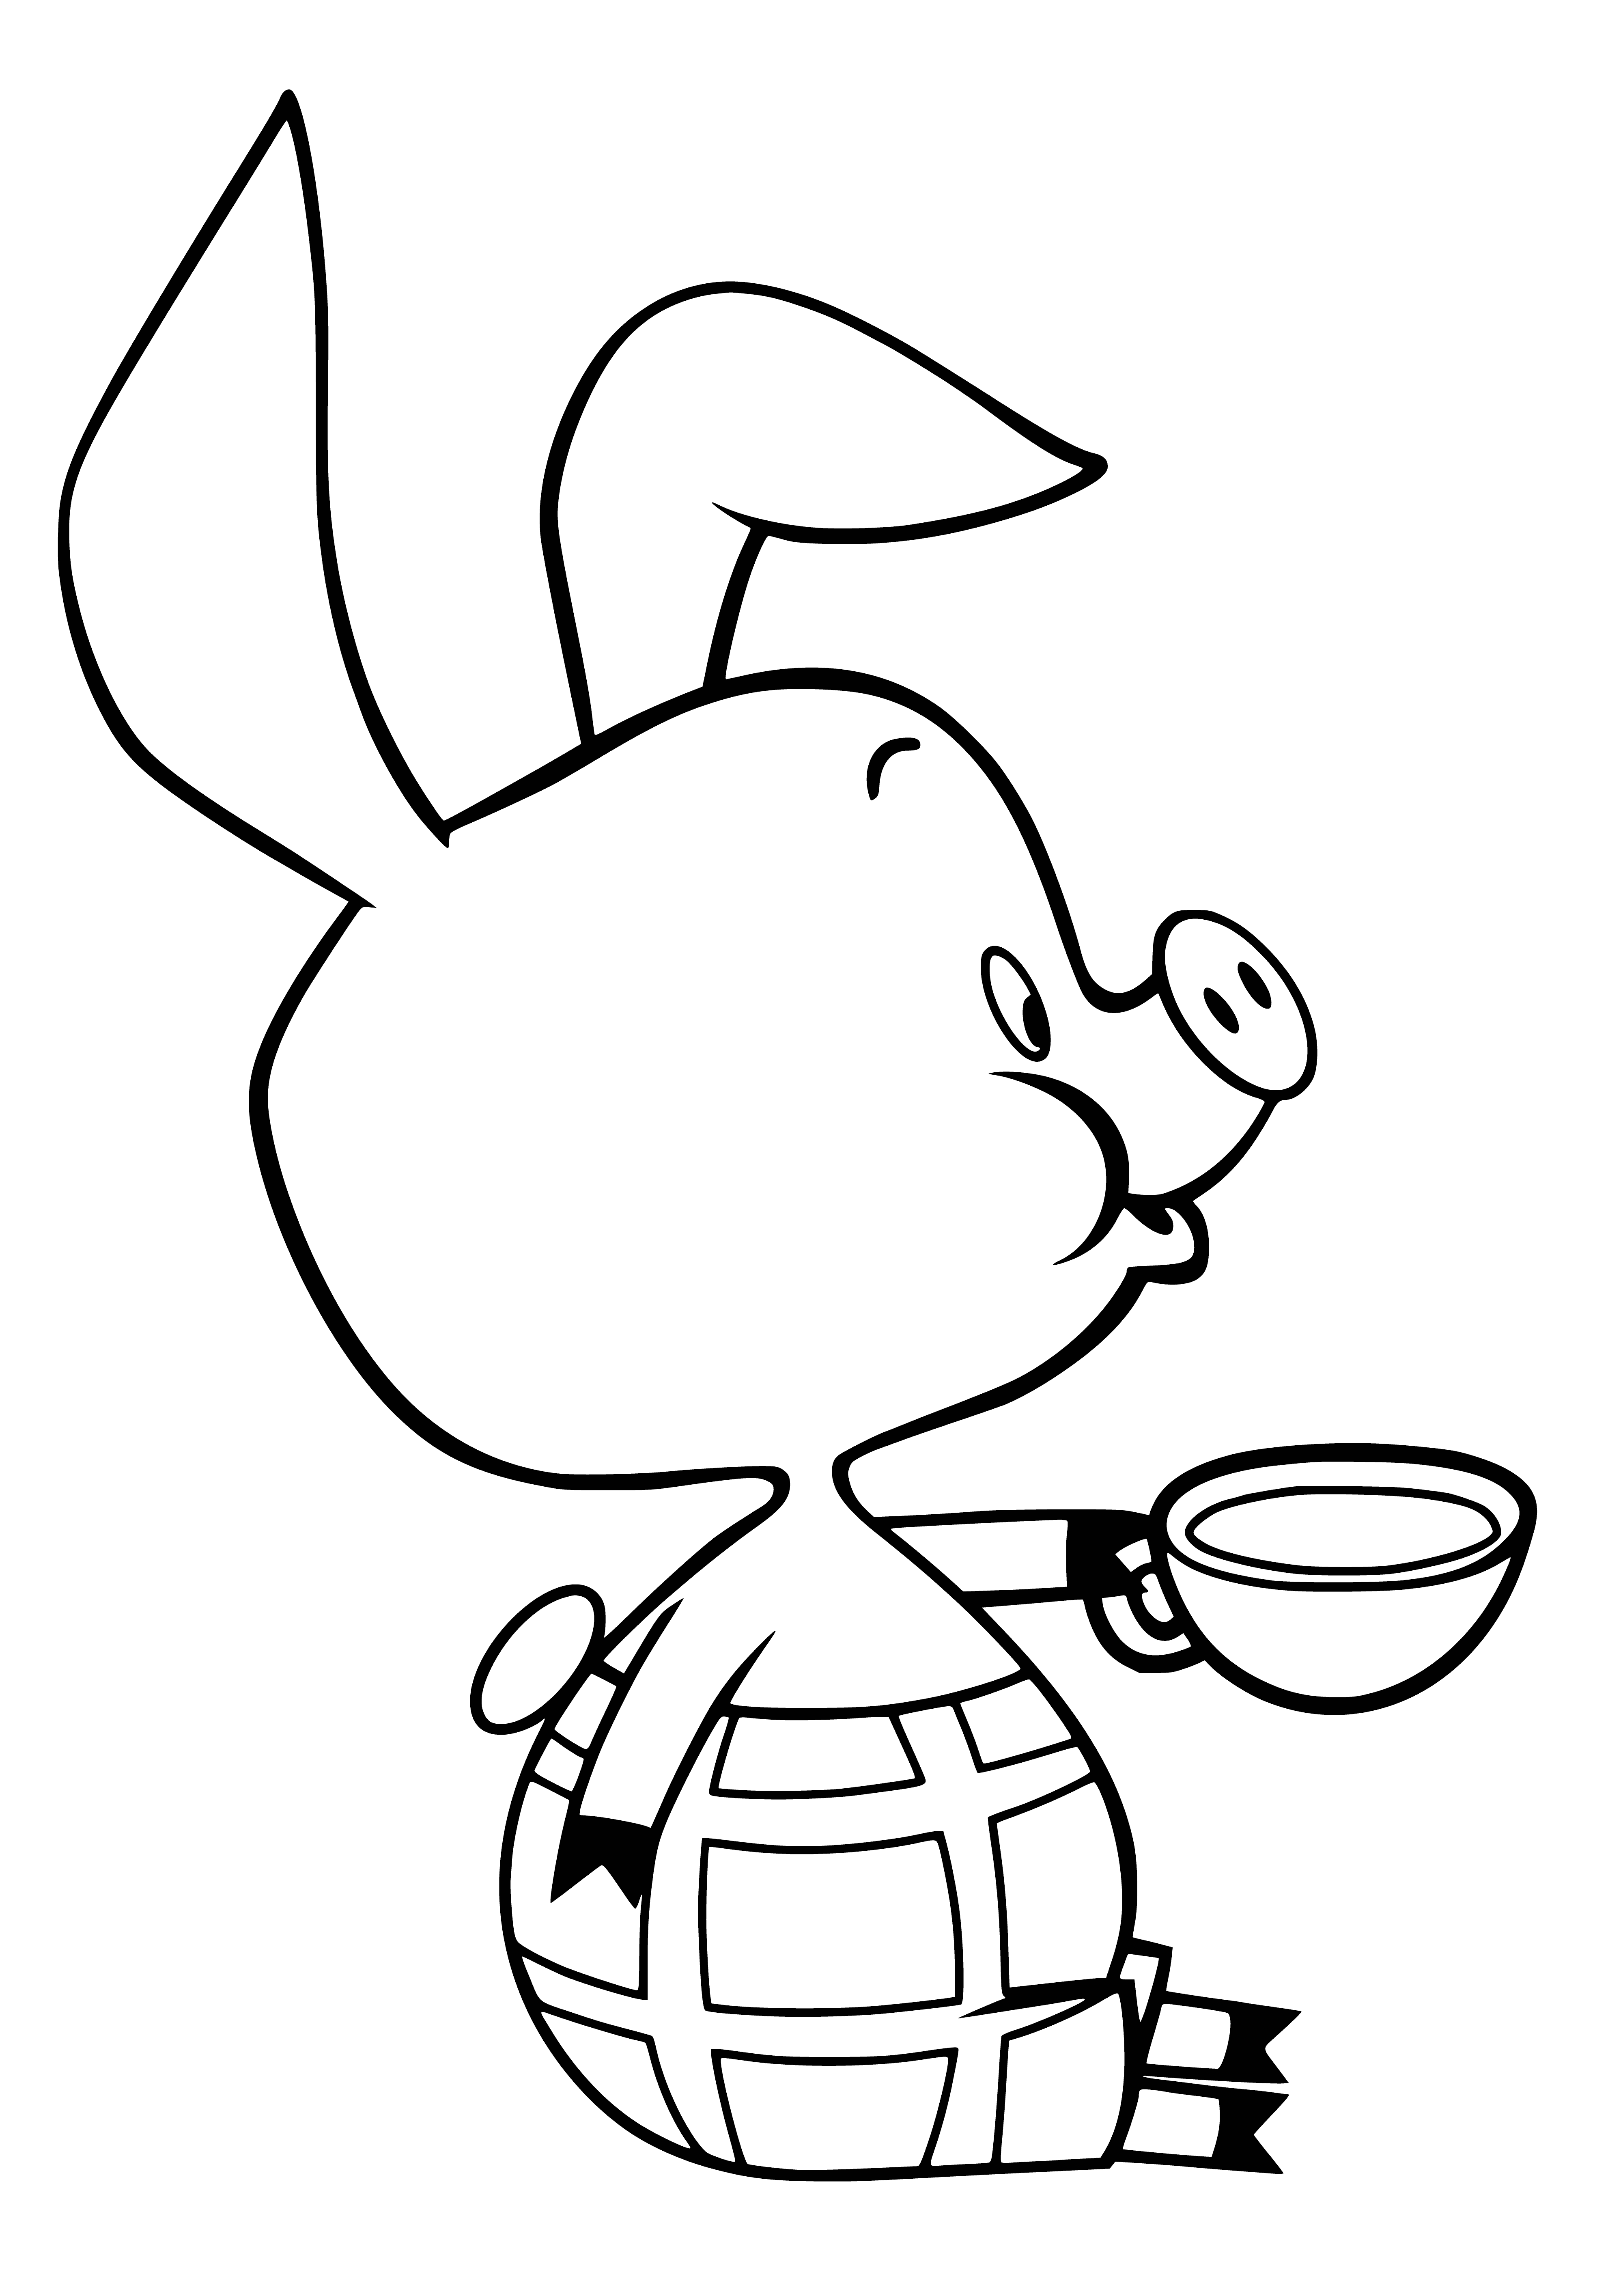 coloring page: Small pale pink piglet with black eyes wearing a red scarf. Curly tail and two hooves. Nose is tiny and black.